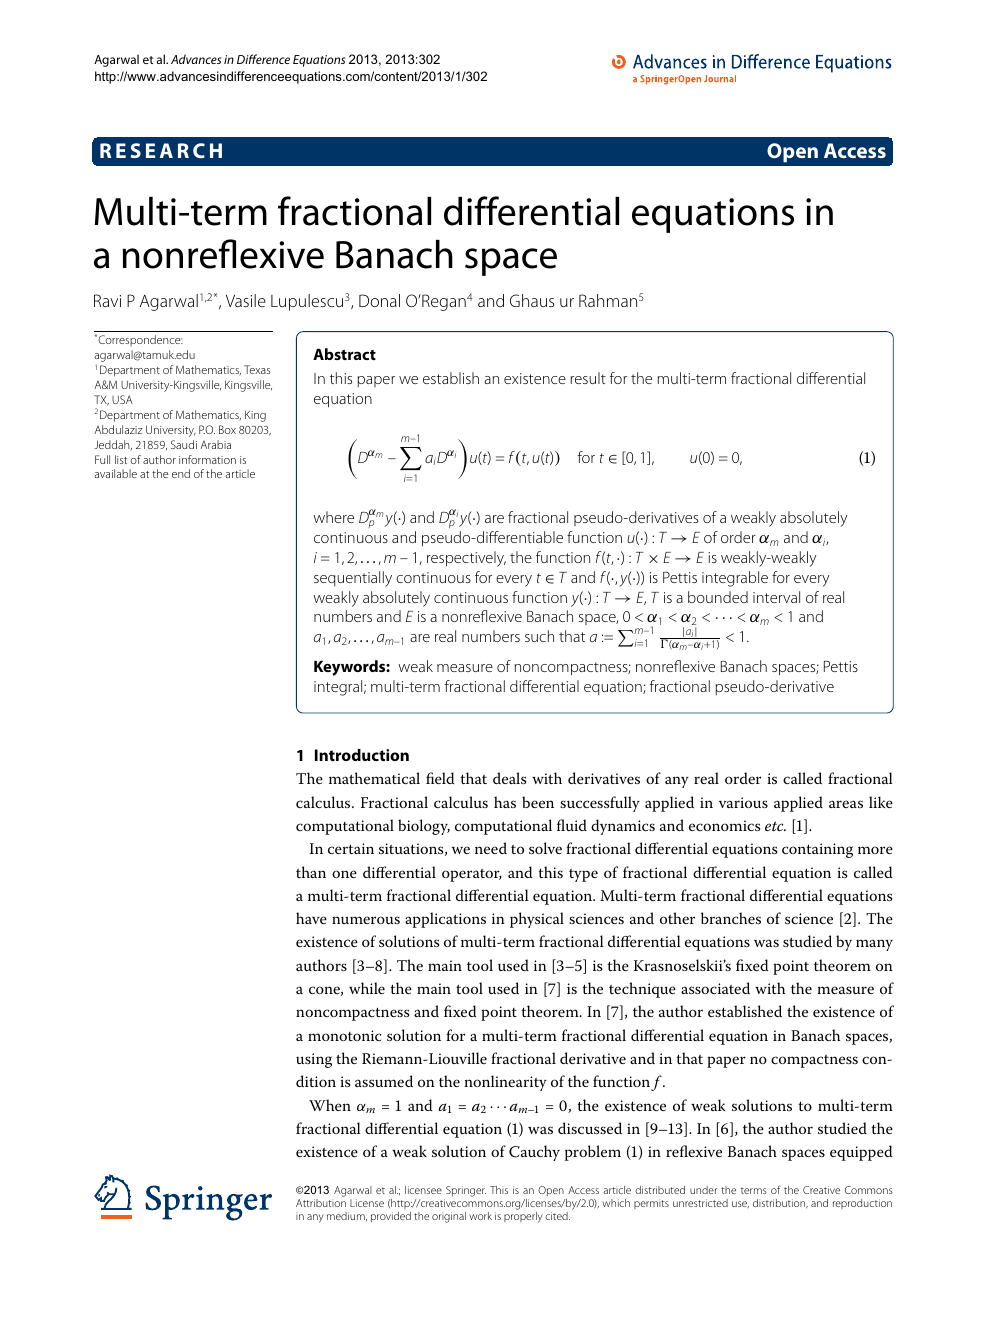 Multi Term Fractional Differential Equations In A Nonreflexive Banach Space Topic Of Research Paper In Mathematics Download Scholarly Article Pdf And Read For Free On Cyberleninka Open Science Hub